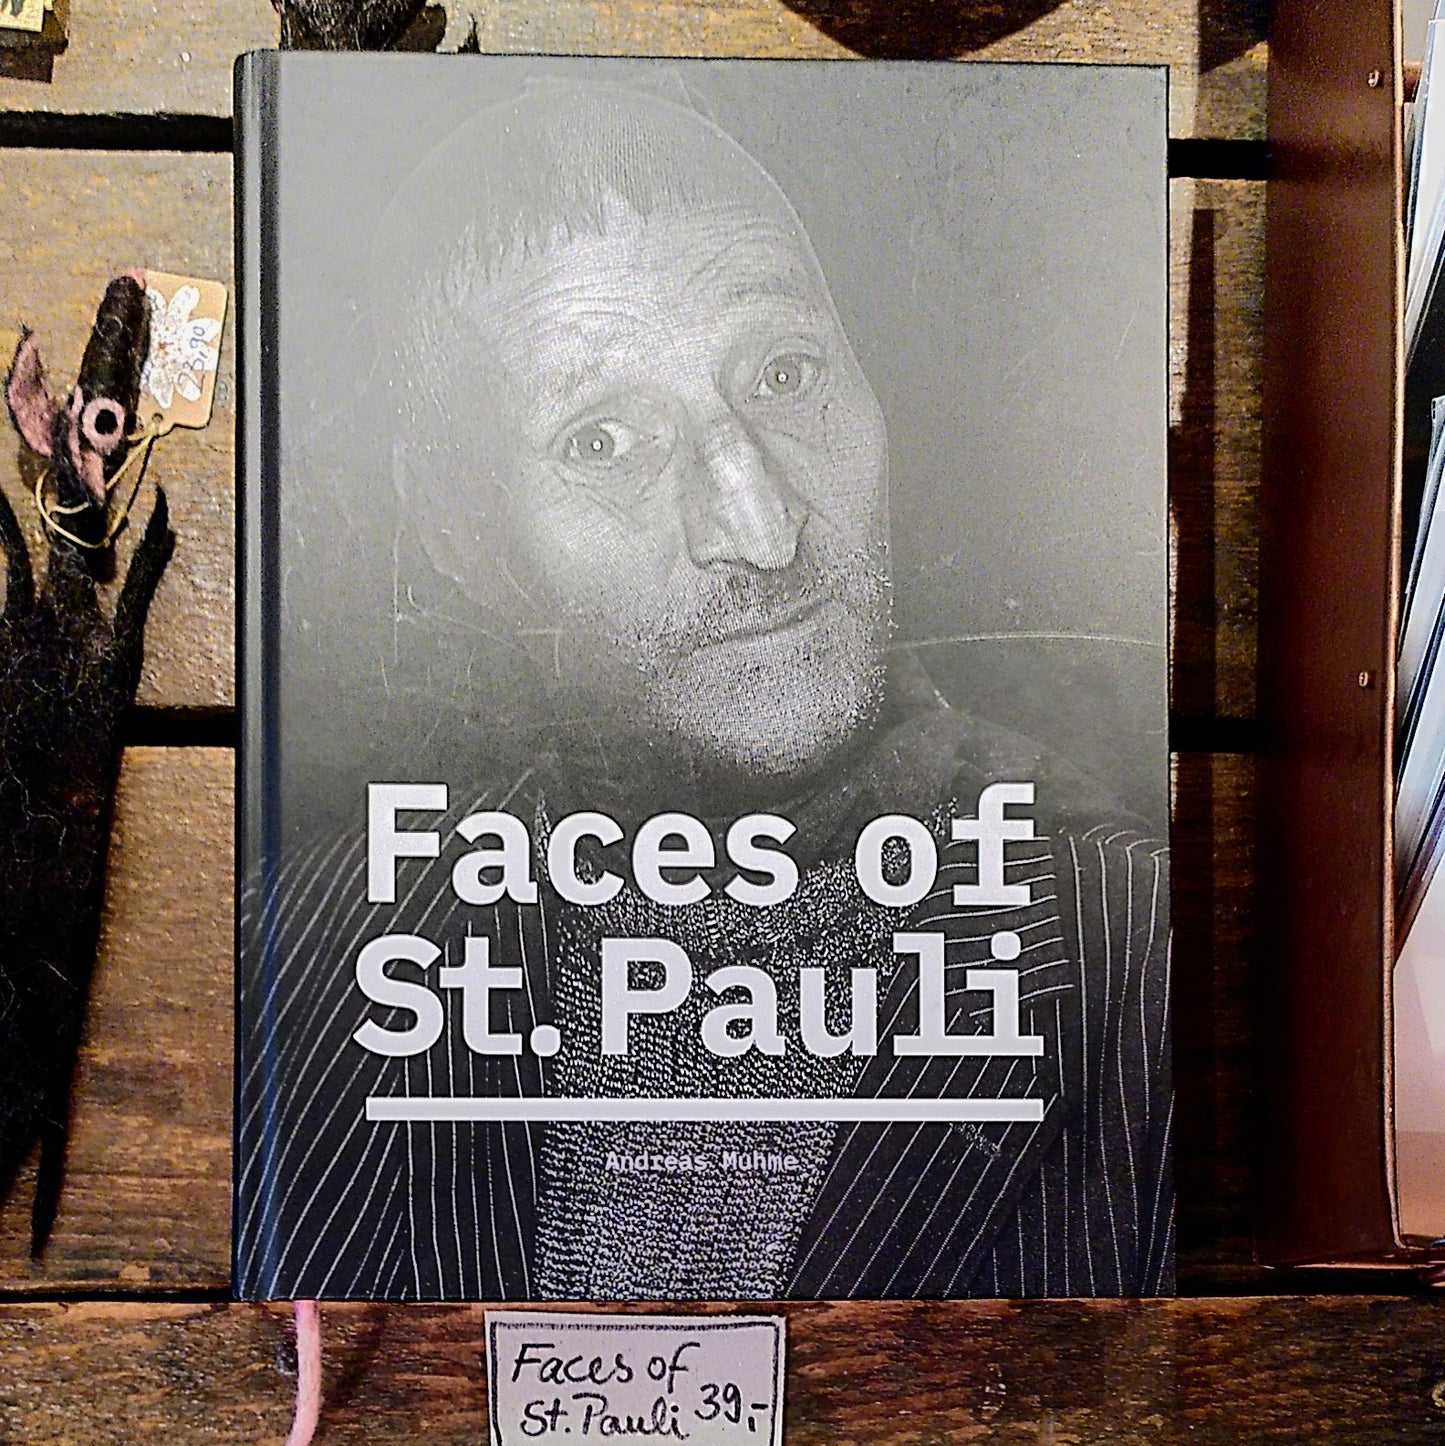 Faces of St.Pauli // Andreas Muhme